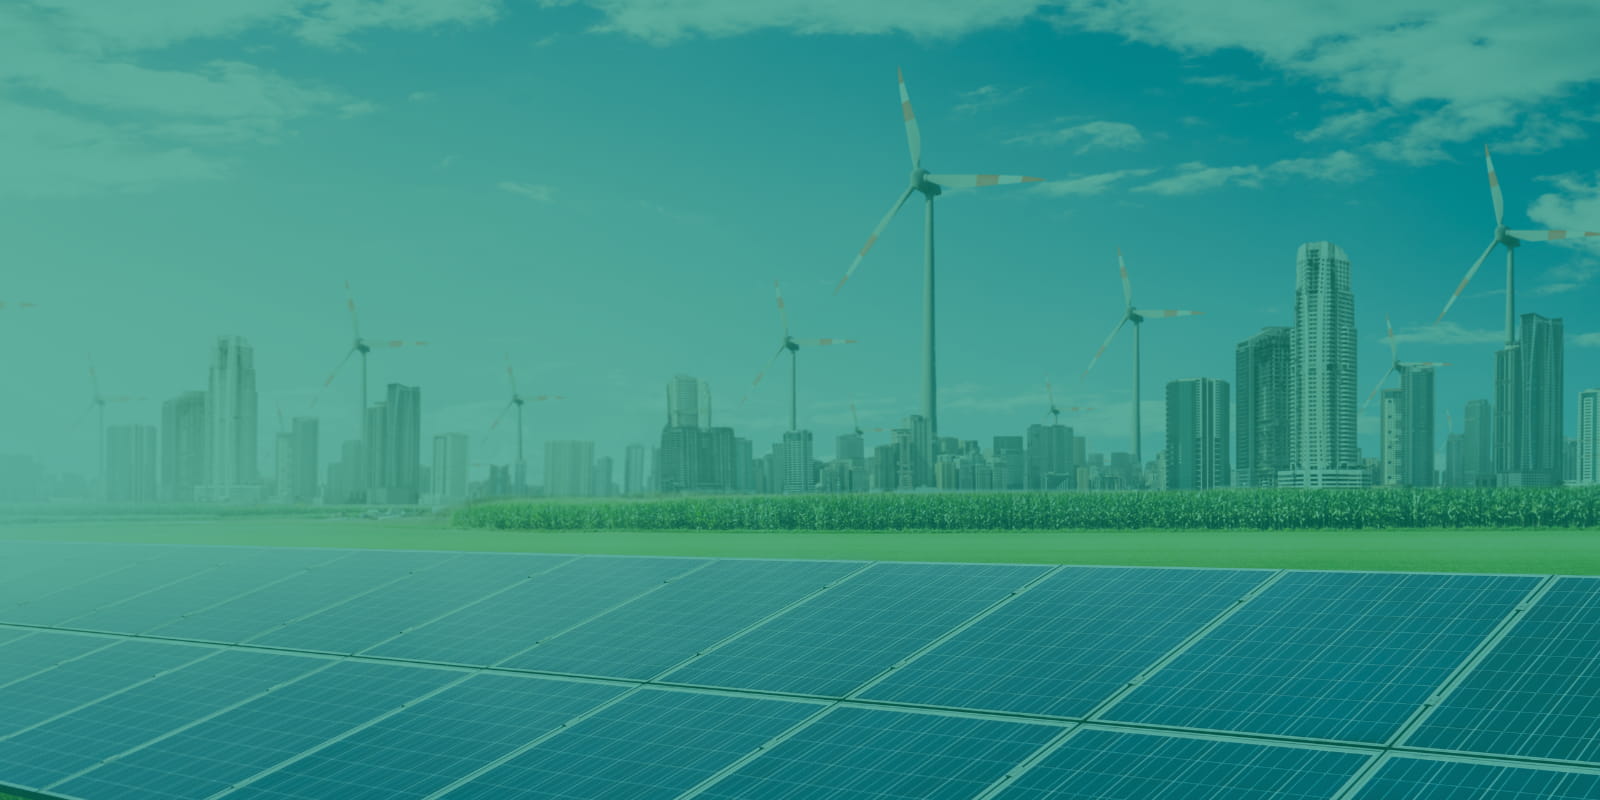 Setting Up A Renewable Energy Company In The Uae